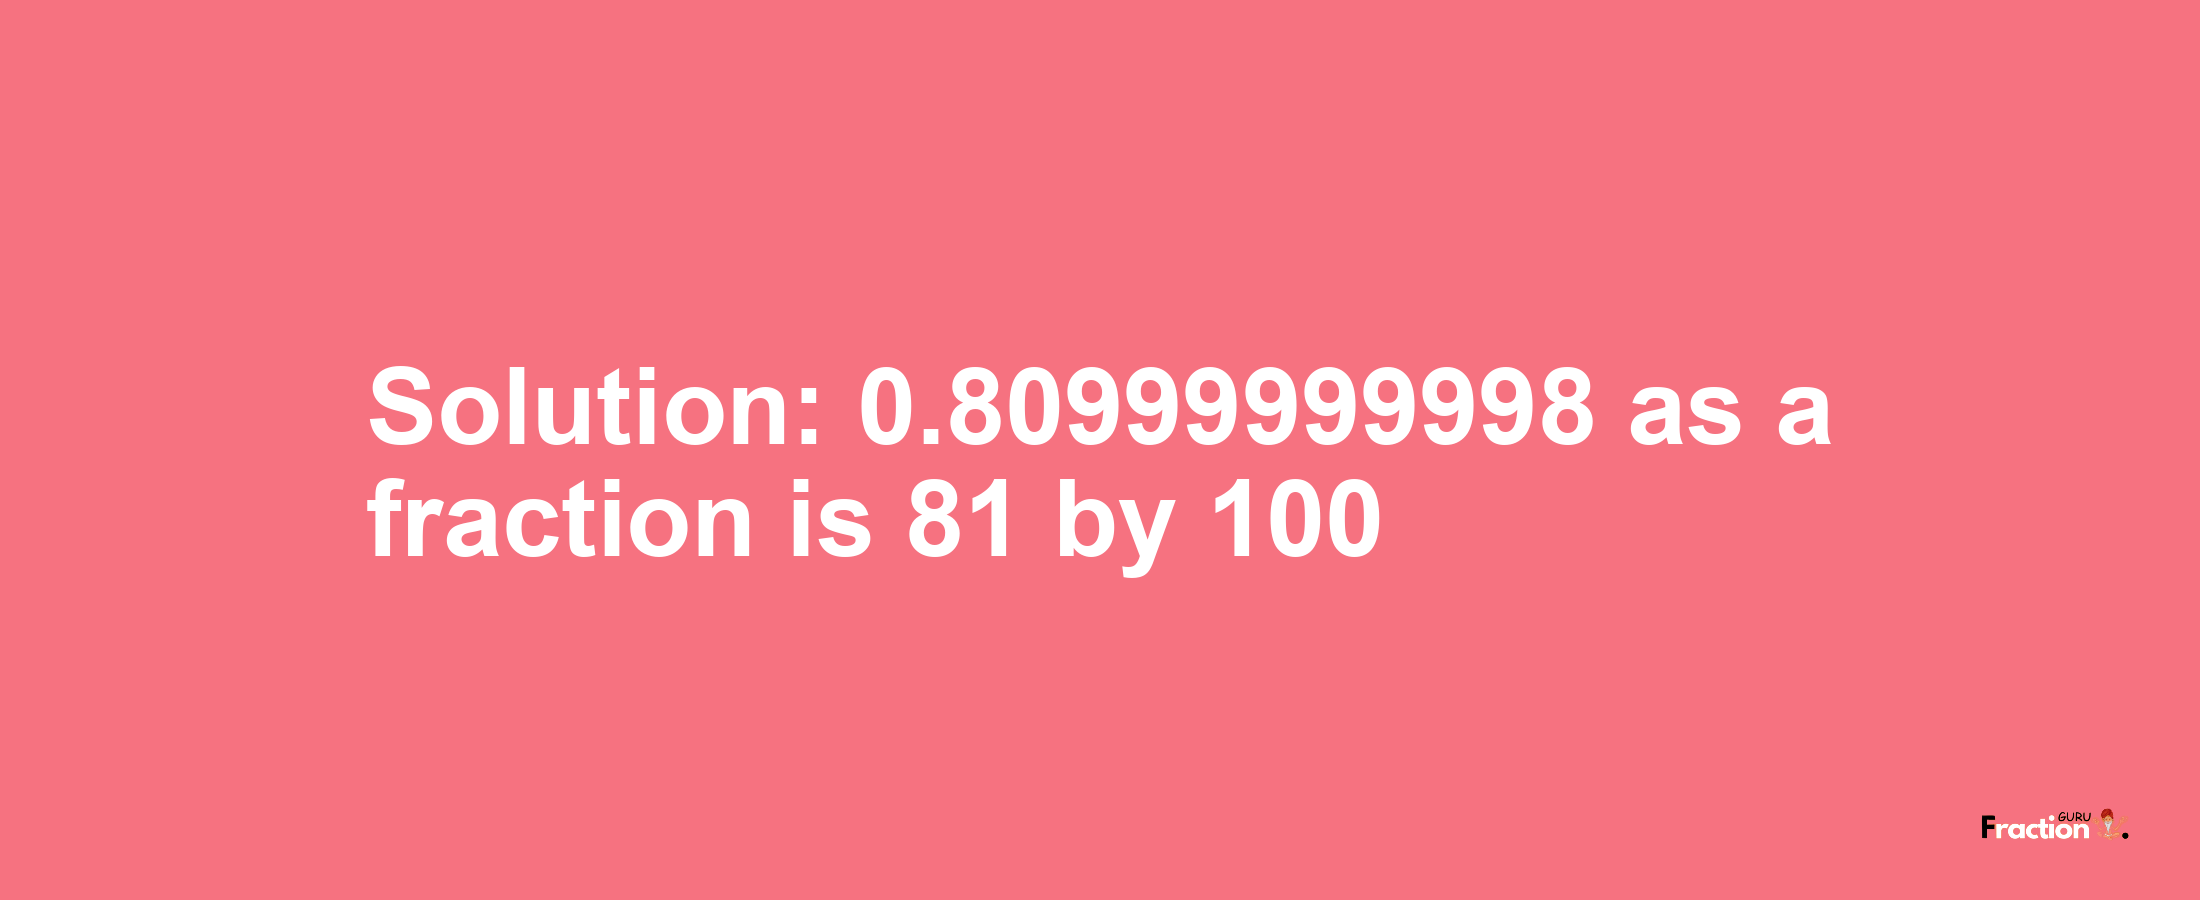 Solution:0.80999999998 as a fraction is 81/100